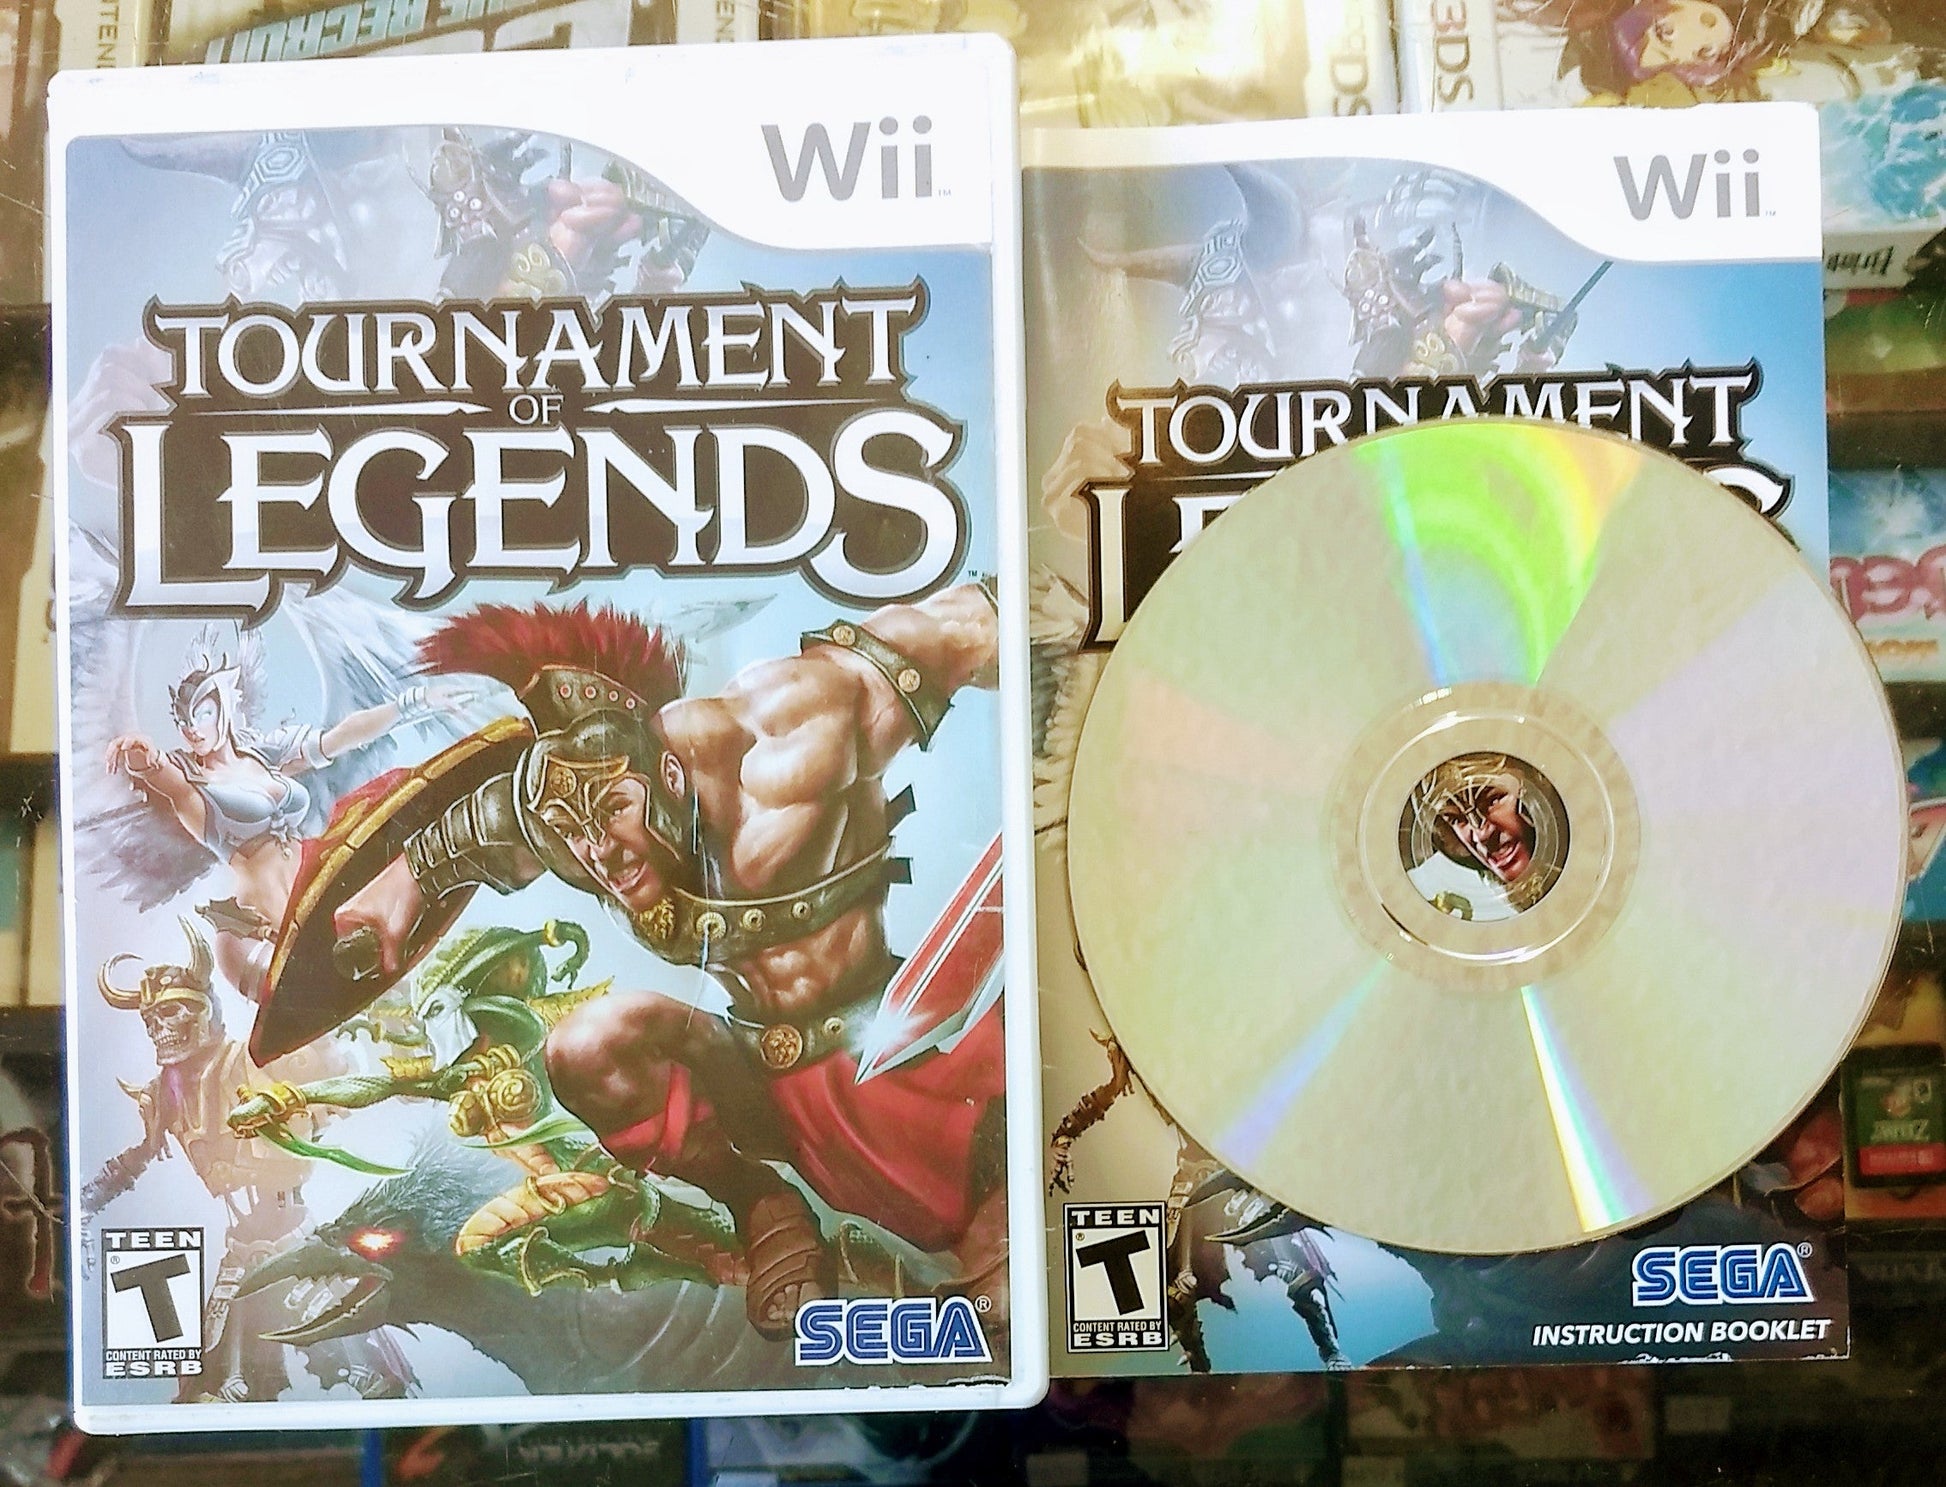 TOURNAMENT OF LEGENDS NINTENDO WII - jeux video game-x